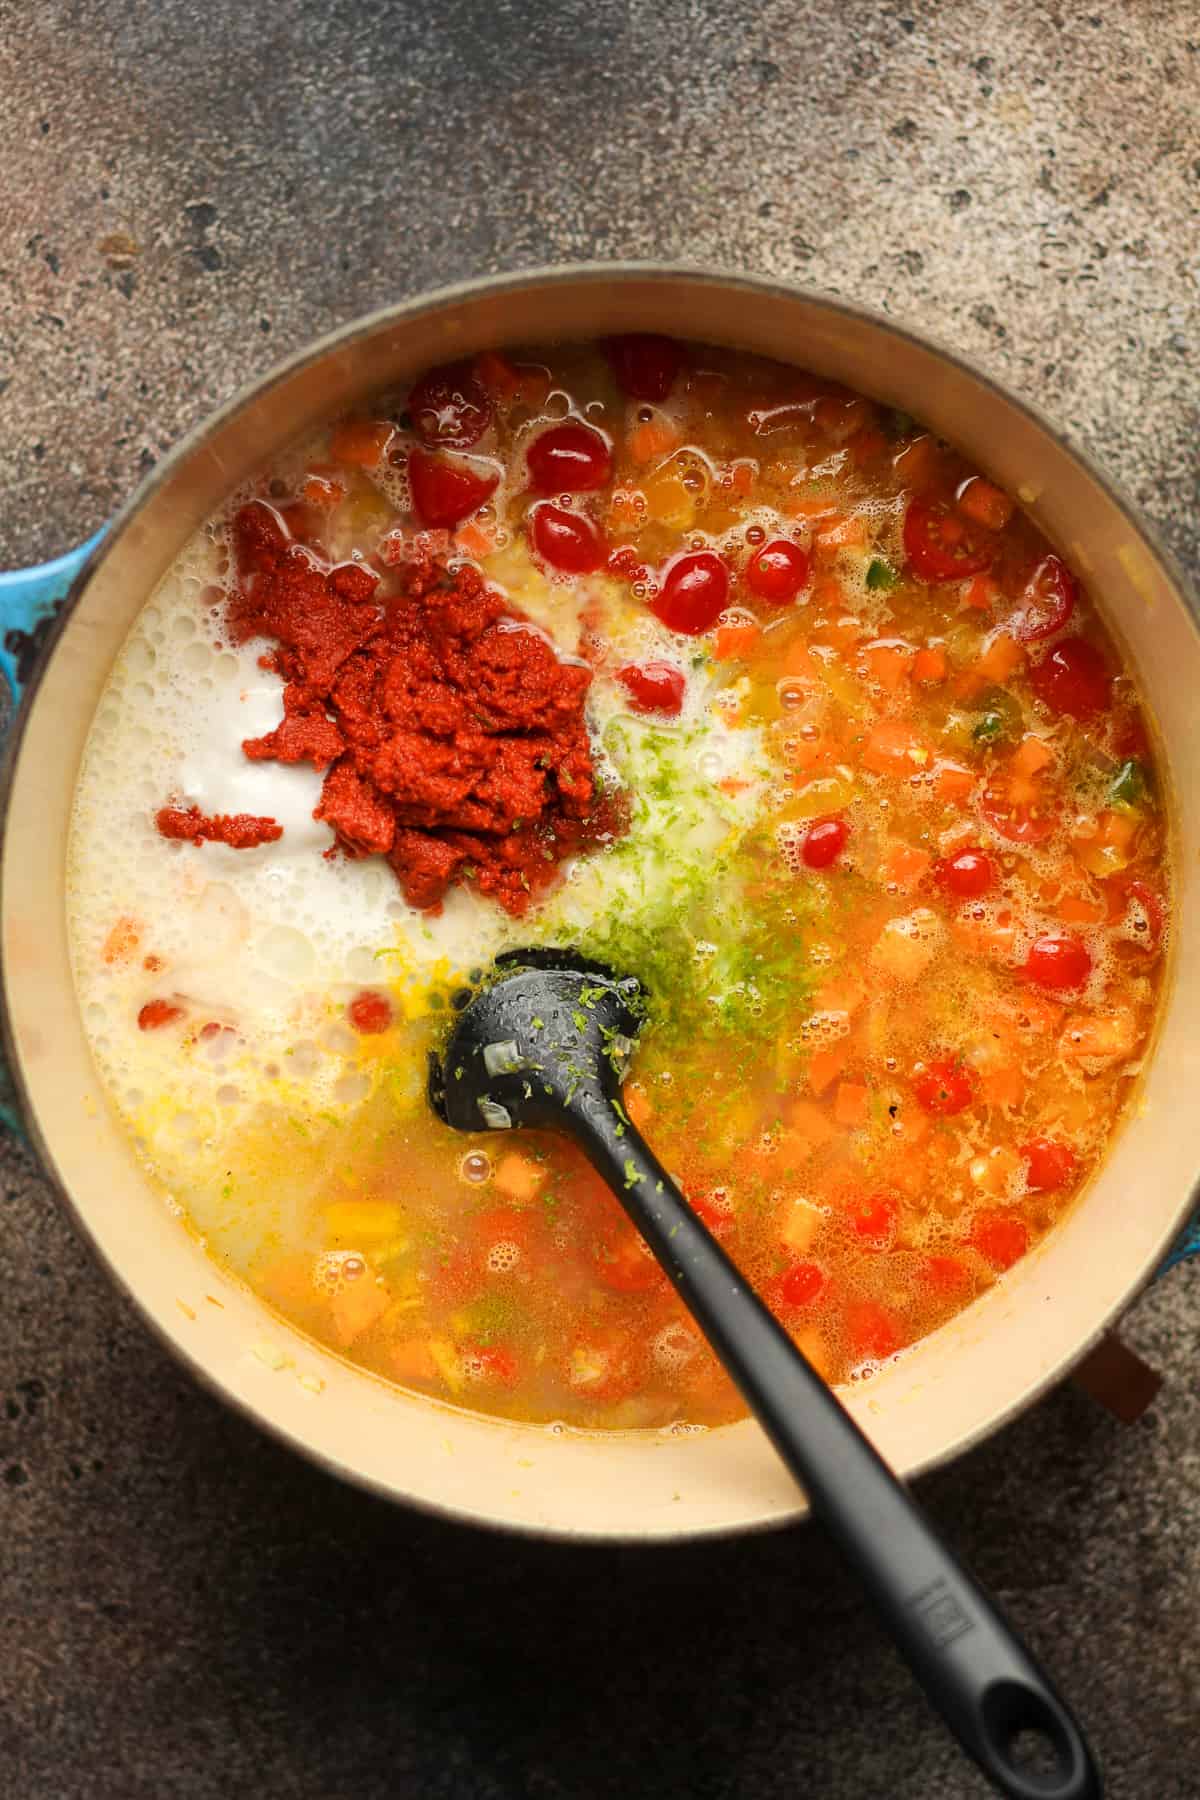 A pot of the stew ingredients after adding the chili paste.